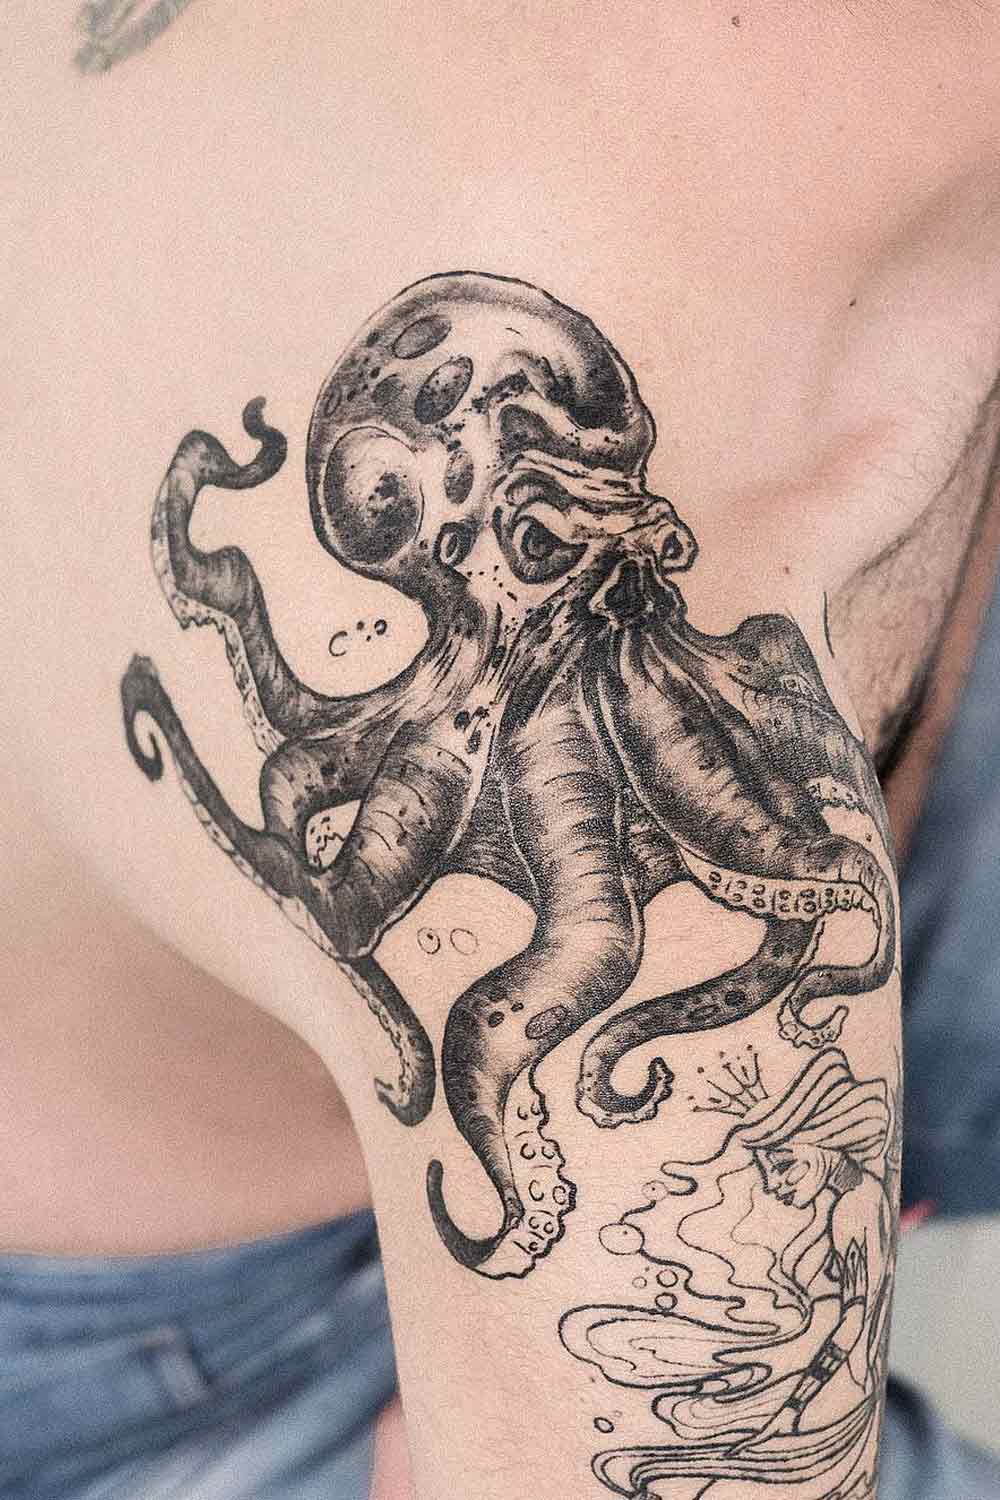 How Much Does An Octopus Tattoo Cost?